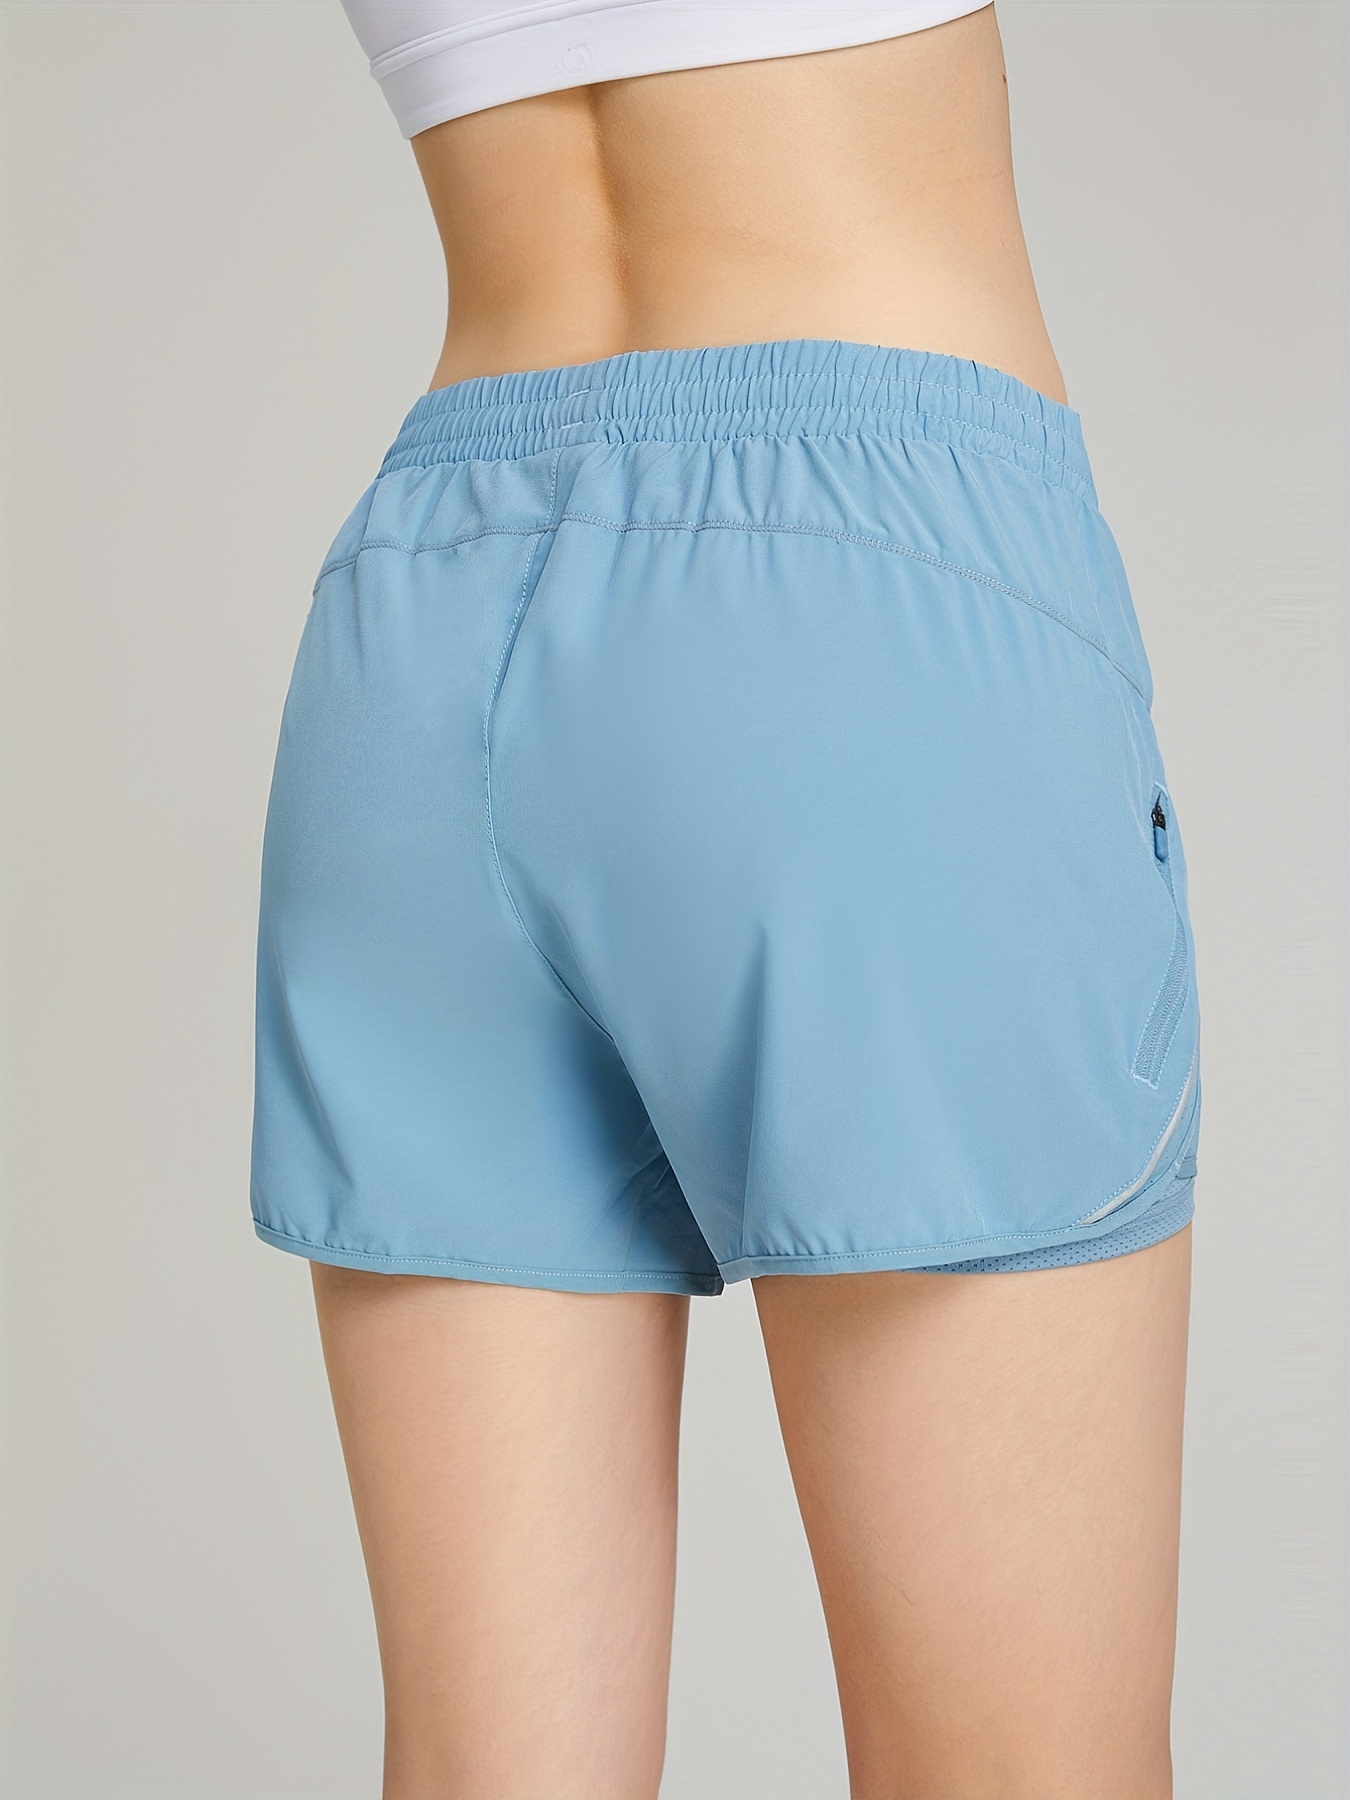 Dares Only Teal Blue 2 in 1 Run Short women – The Short Store